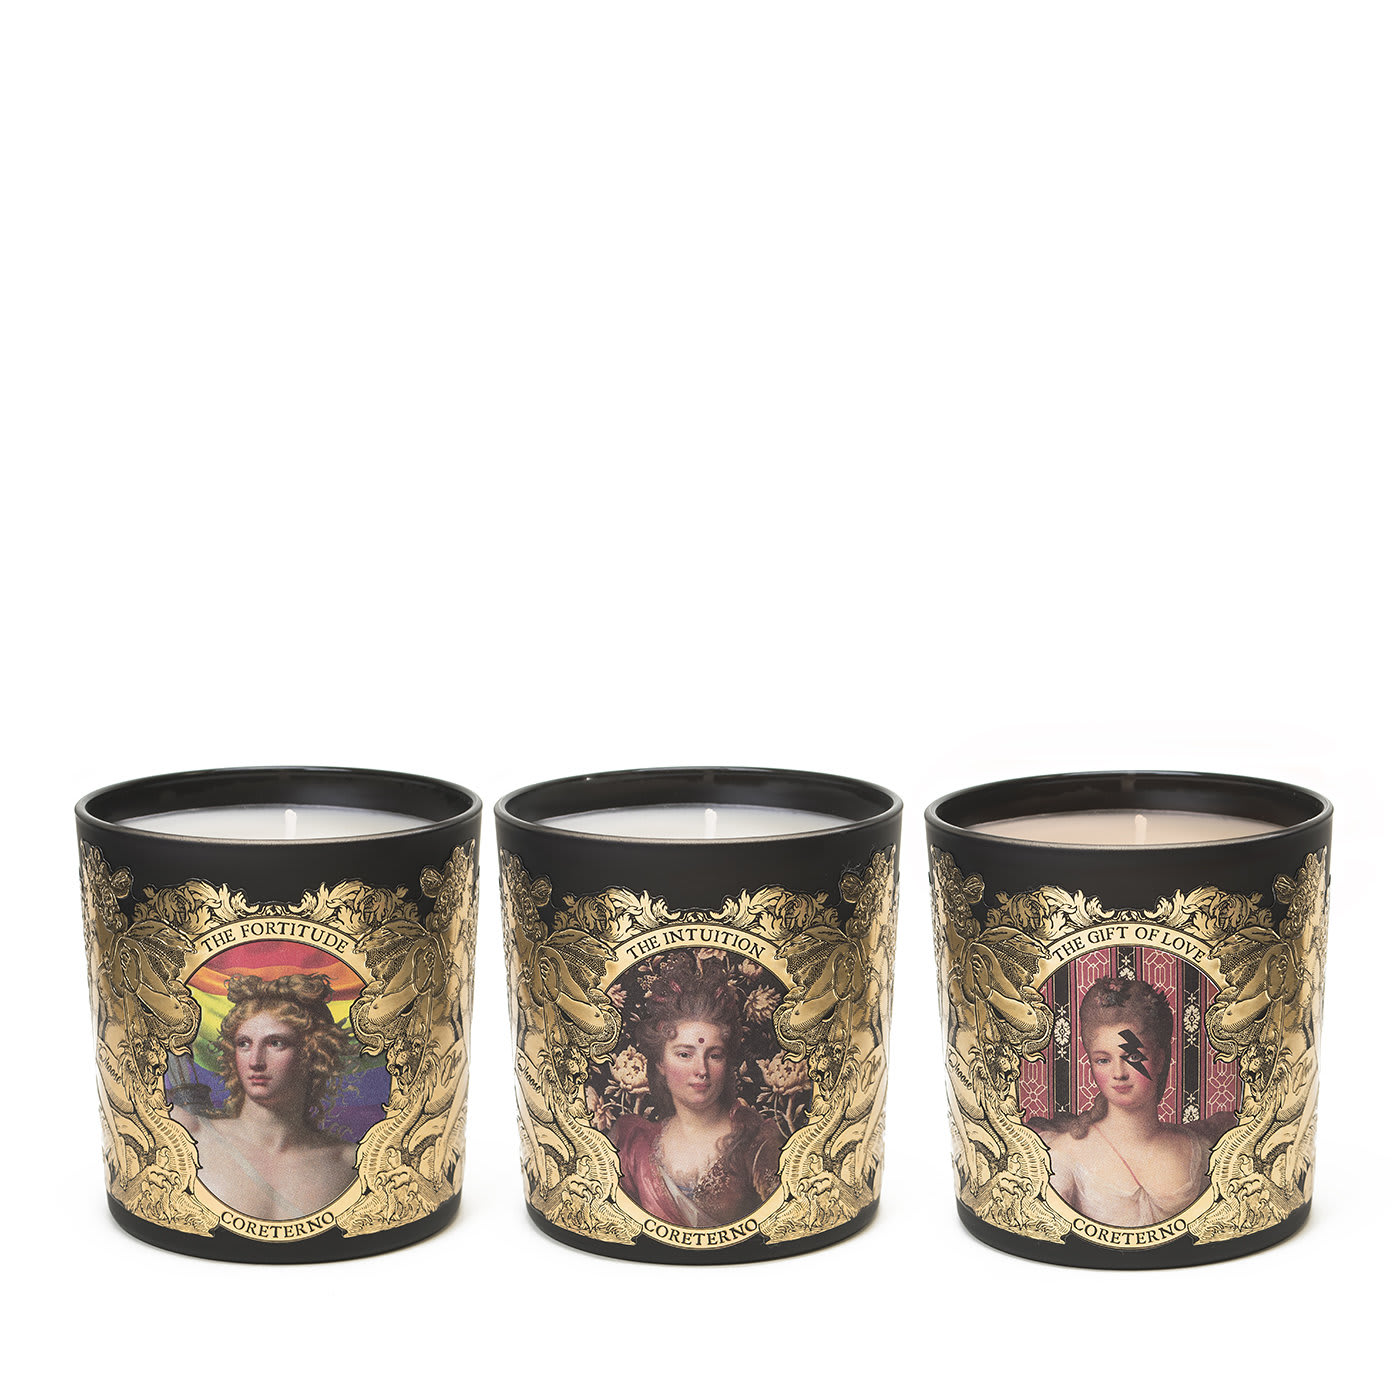 The Intuition, The Fortitude and The Gift of Love Set of 3 Scented Candles - Coreterno